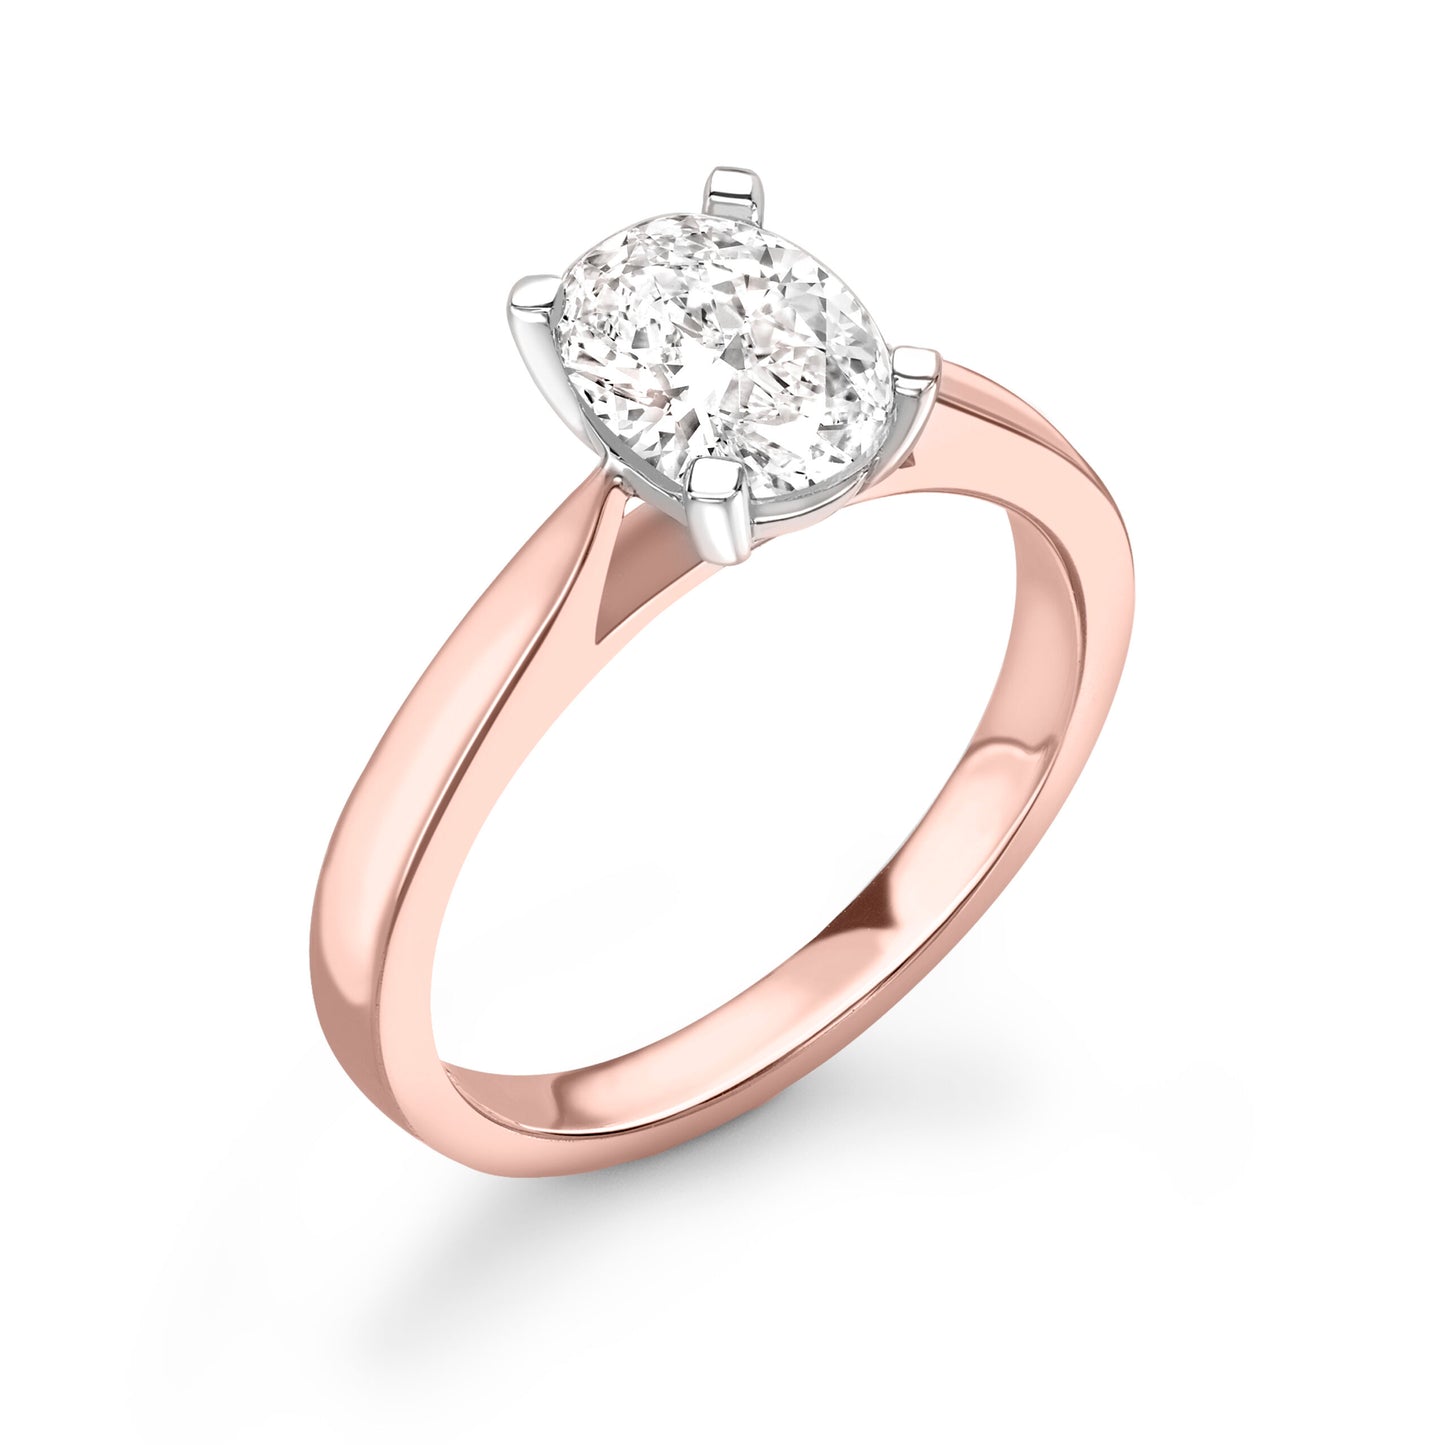 Oval Solitaire Diamond ring in Rose Gold